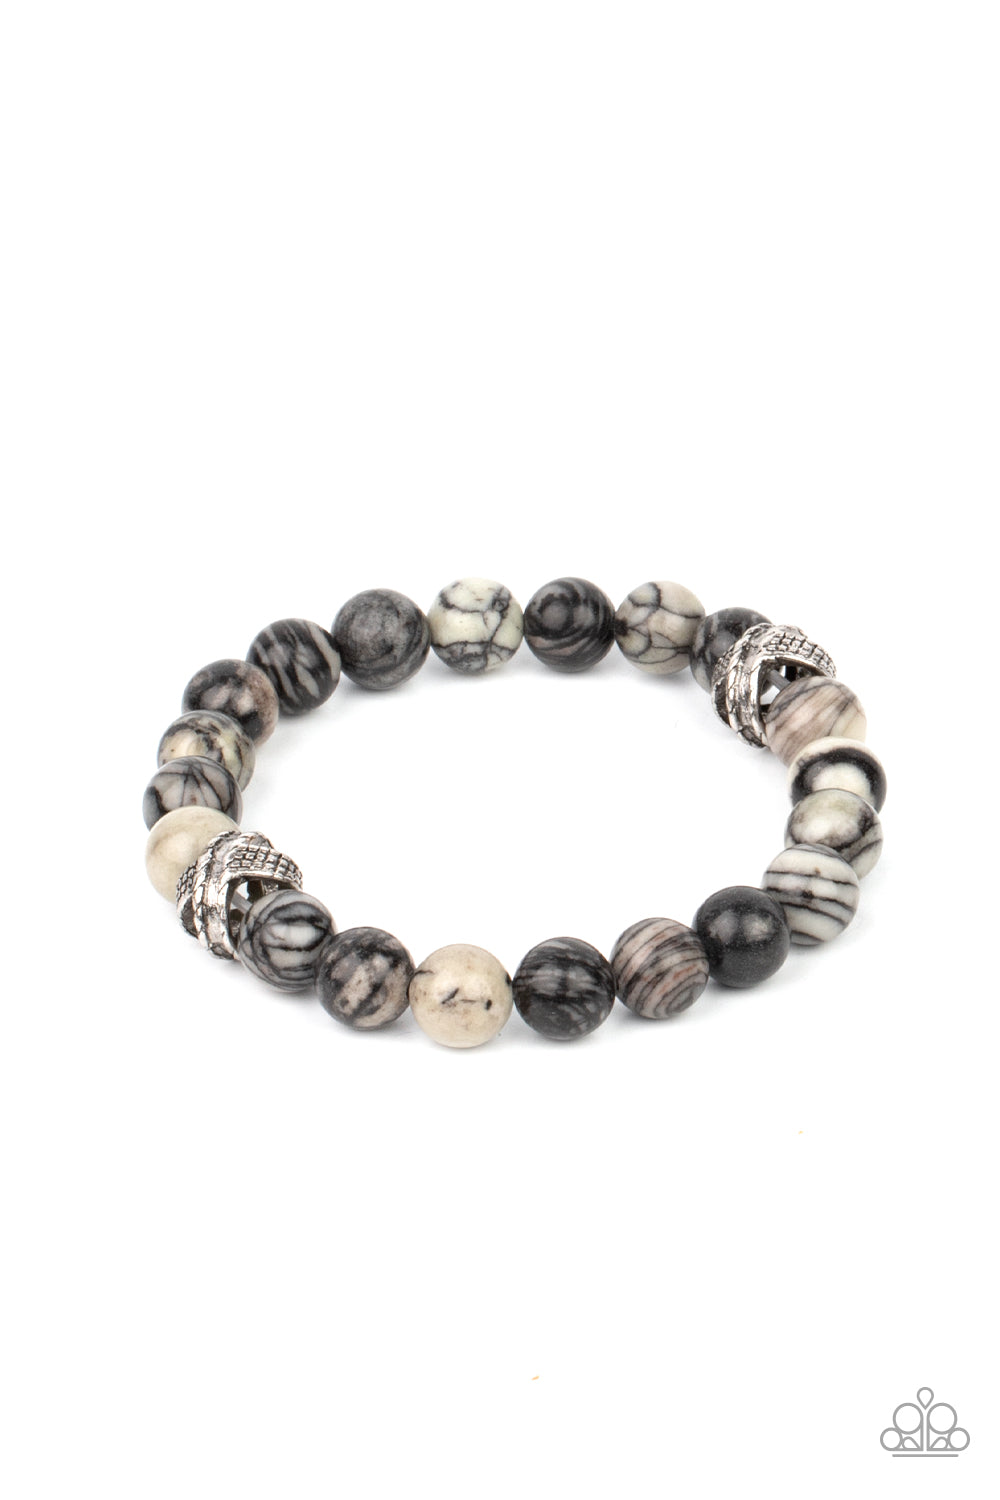 ZEN Commandments Black Urban Bracelet - Paparazzi Accessories  Infused with textured silver accents, an earthy collection of swirling black and white stones are threaded along a stretchy band around the wrist for a seasonal fashion.  All Paparazzi Accessories are lead free and nickel free!  Sold as one individual bracelet.